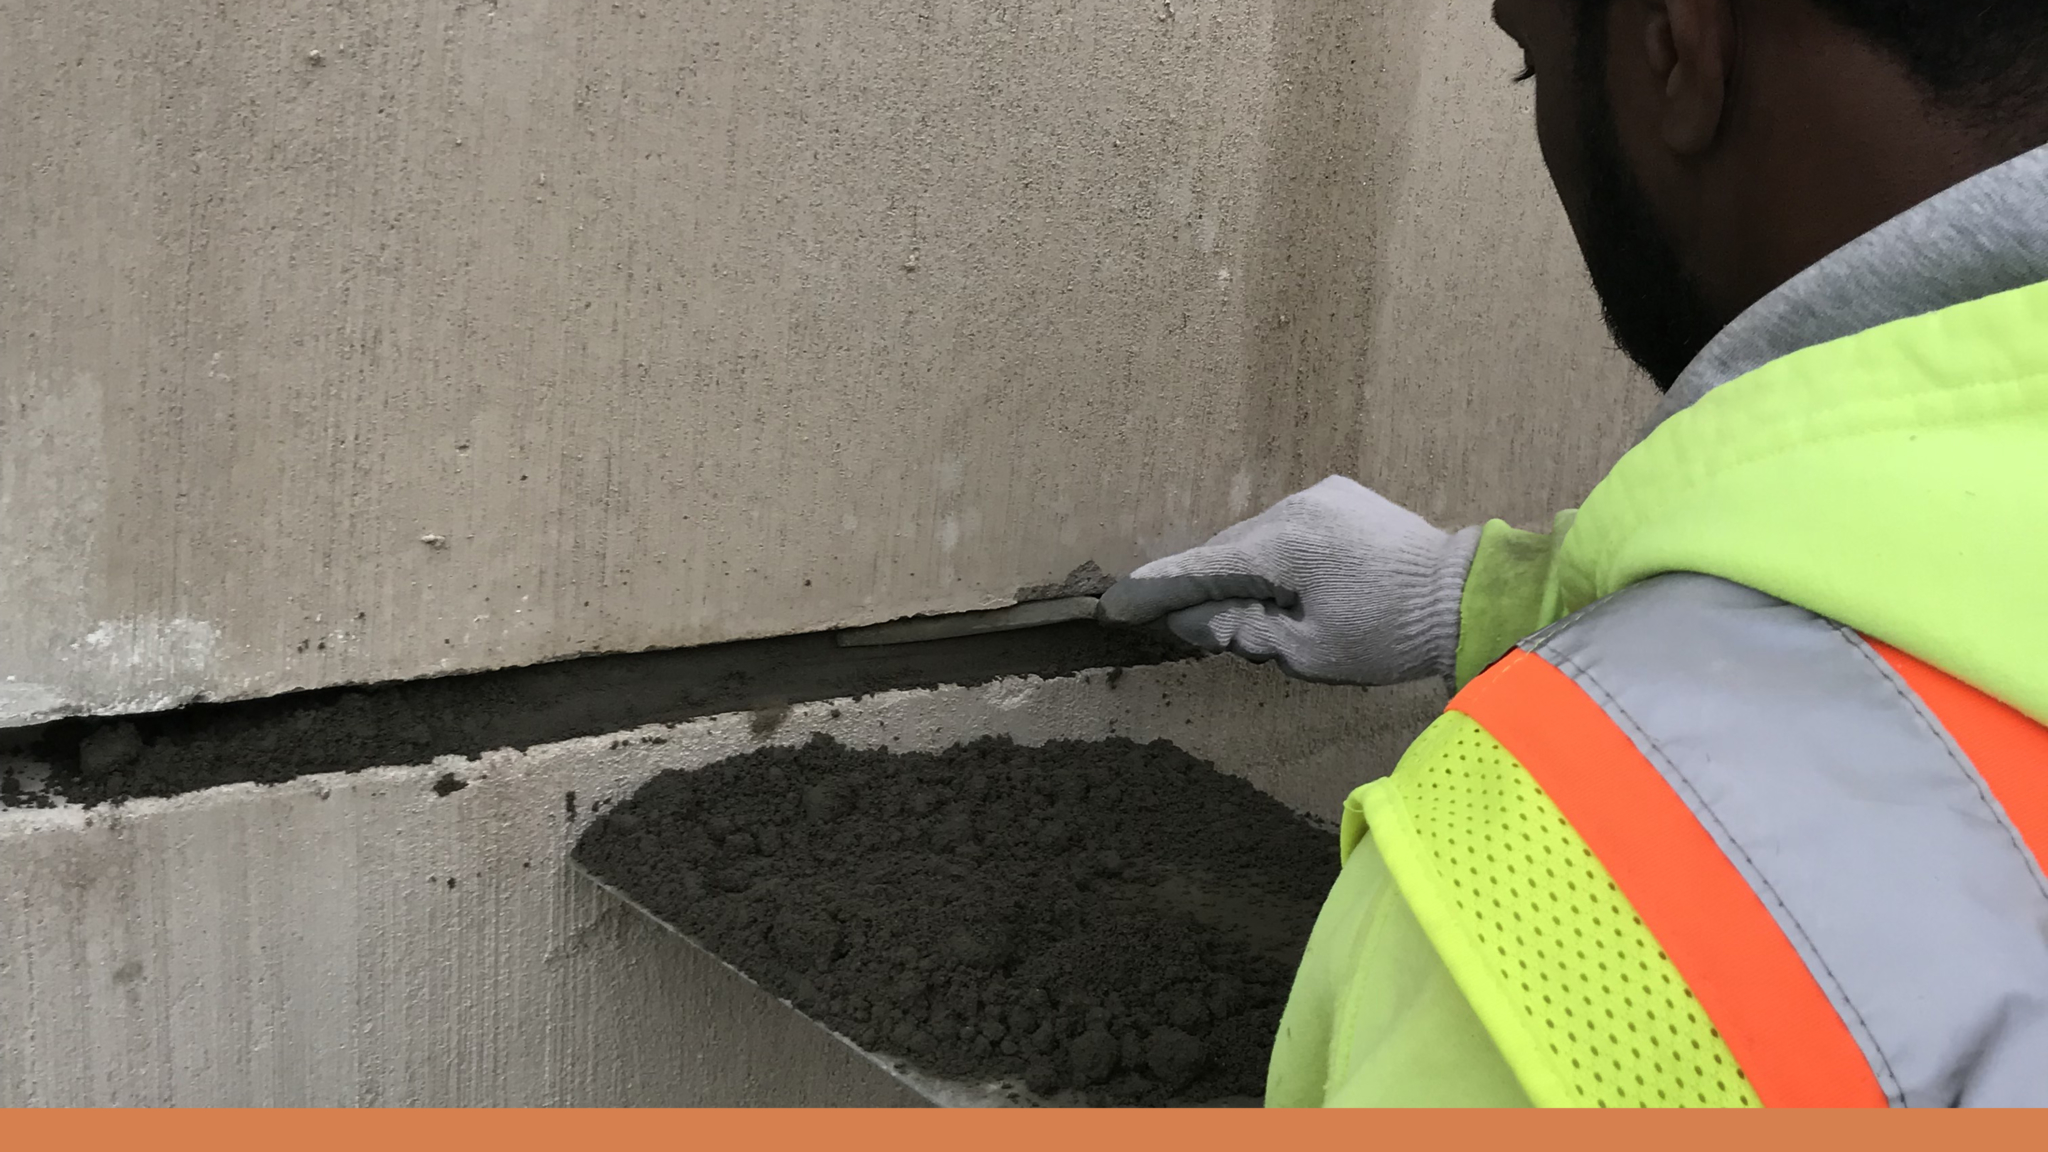 May applying Dry Grout to a seam